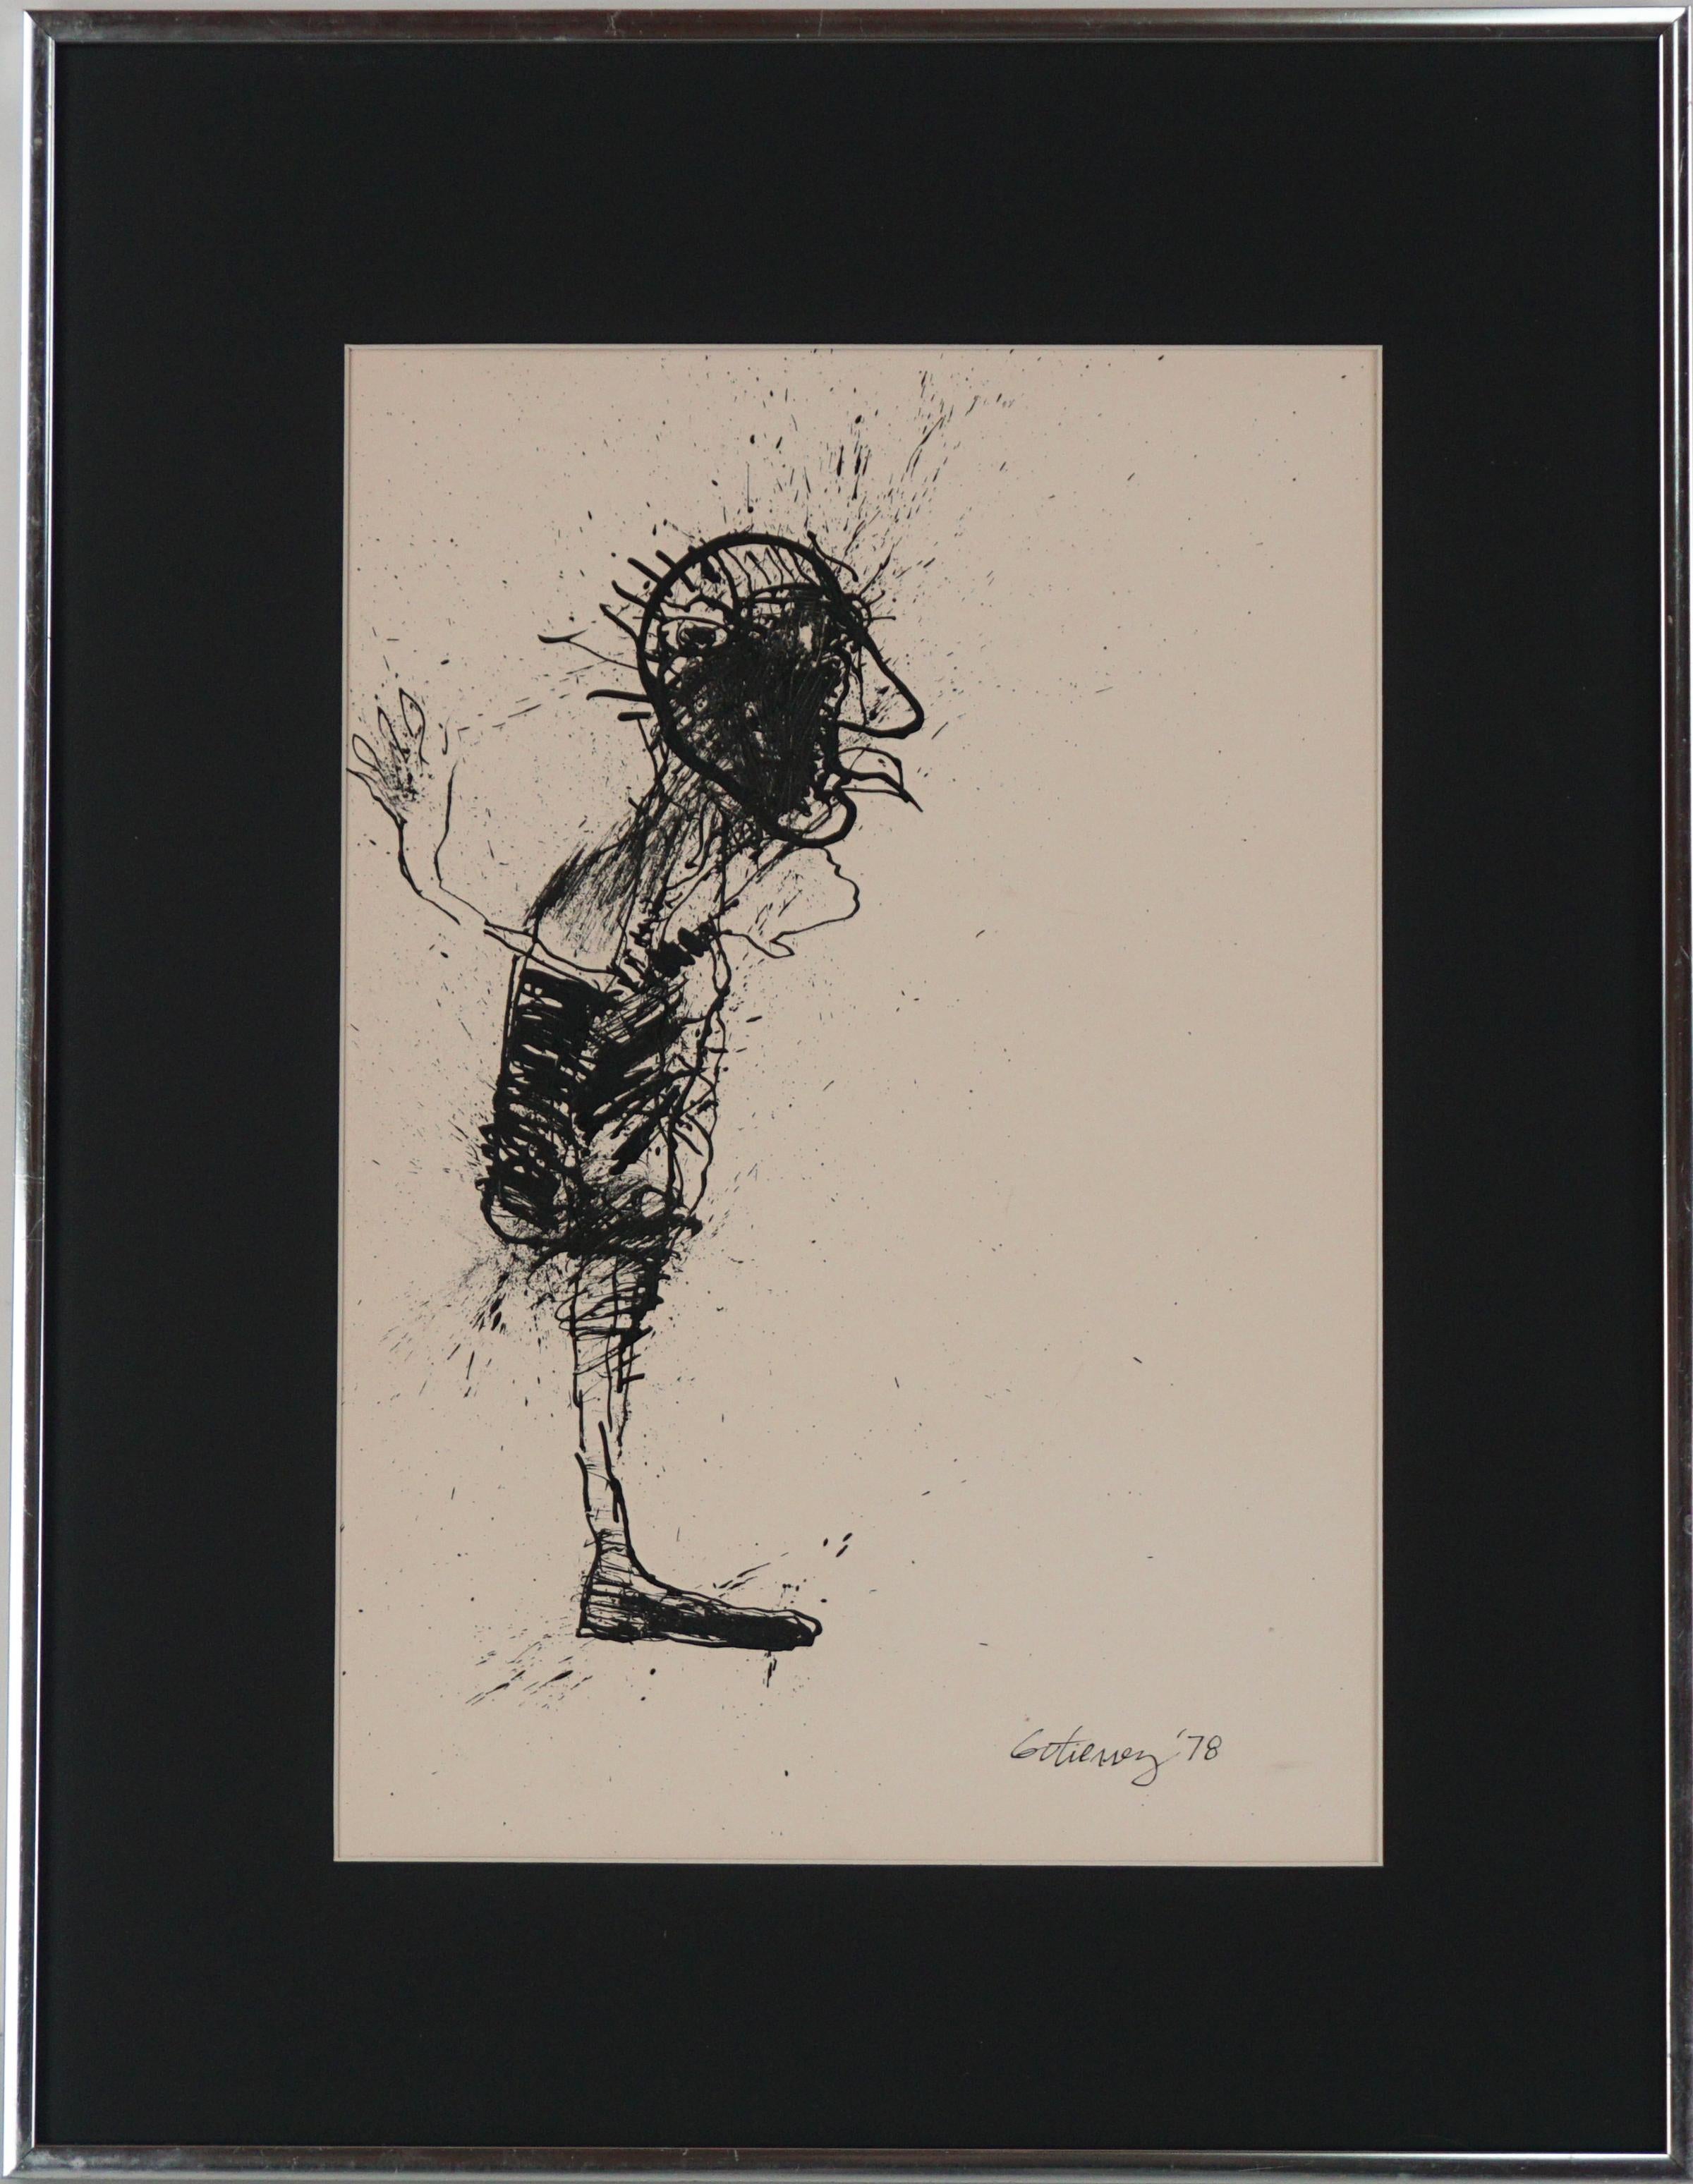 Figurative Art Gutierrez - Vintage Abstracted Expressionist Figurative Ink Drawing -- "How I REALLY Feel" (Comment je me sens vraiment)